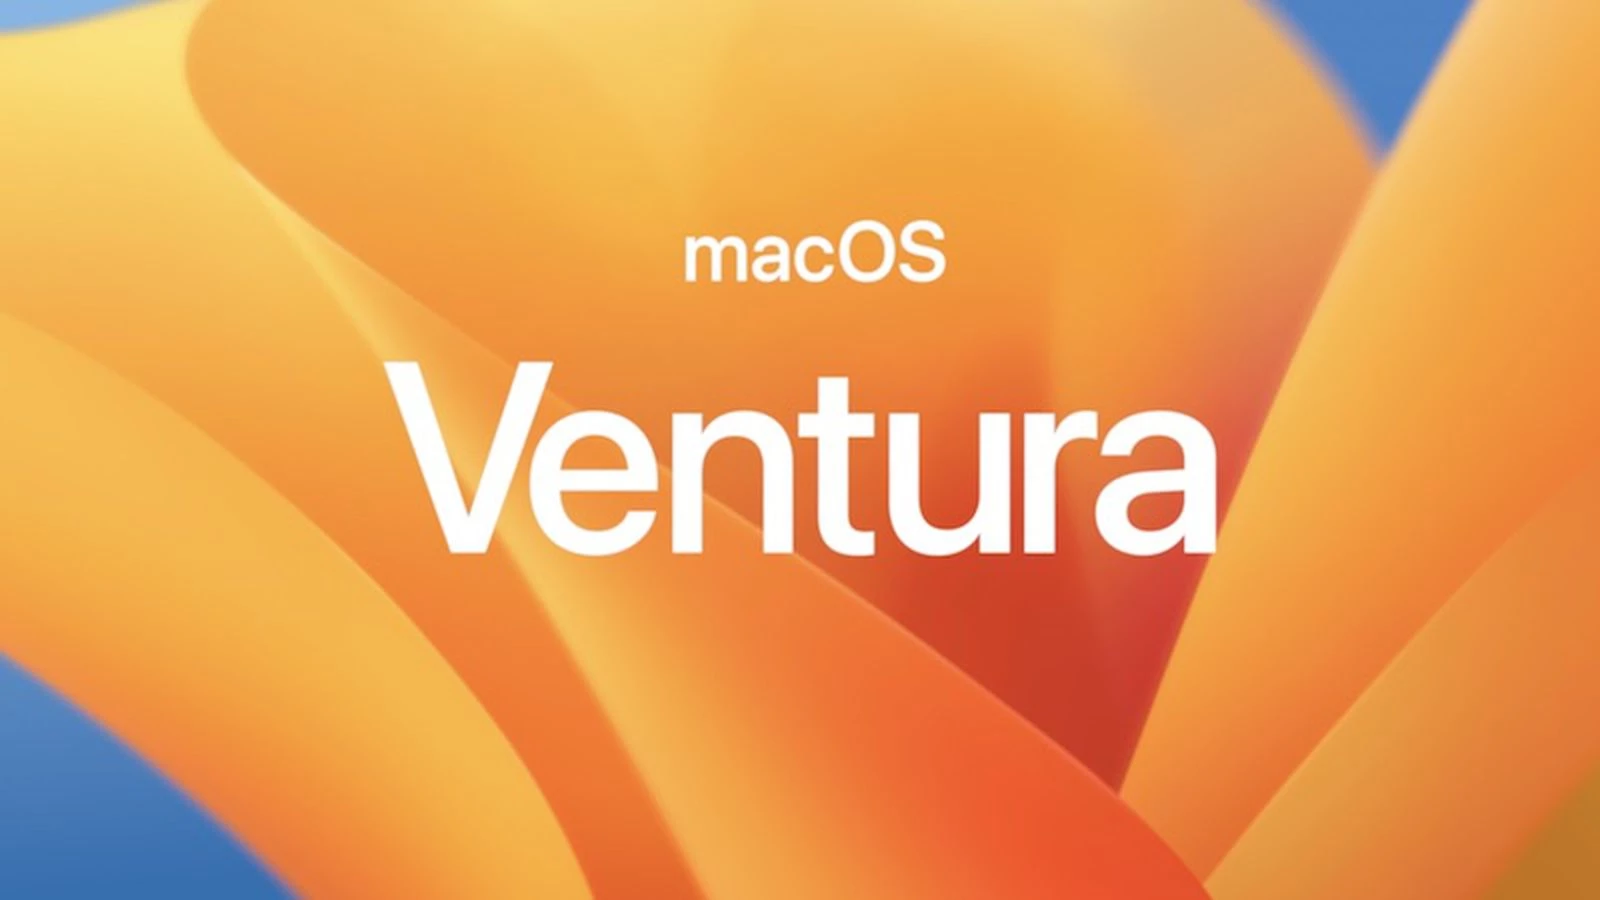 MacOS Ventura Review of new features